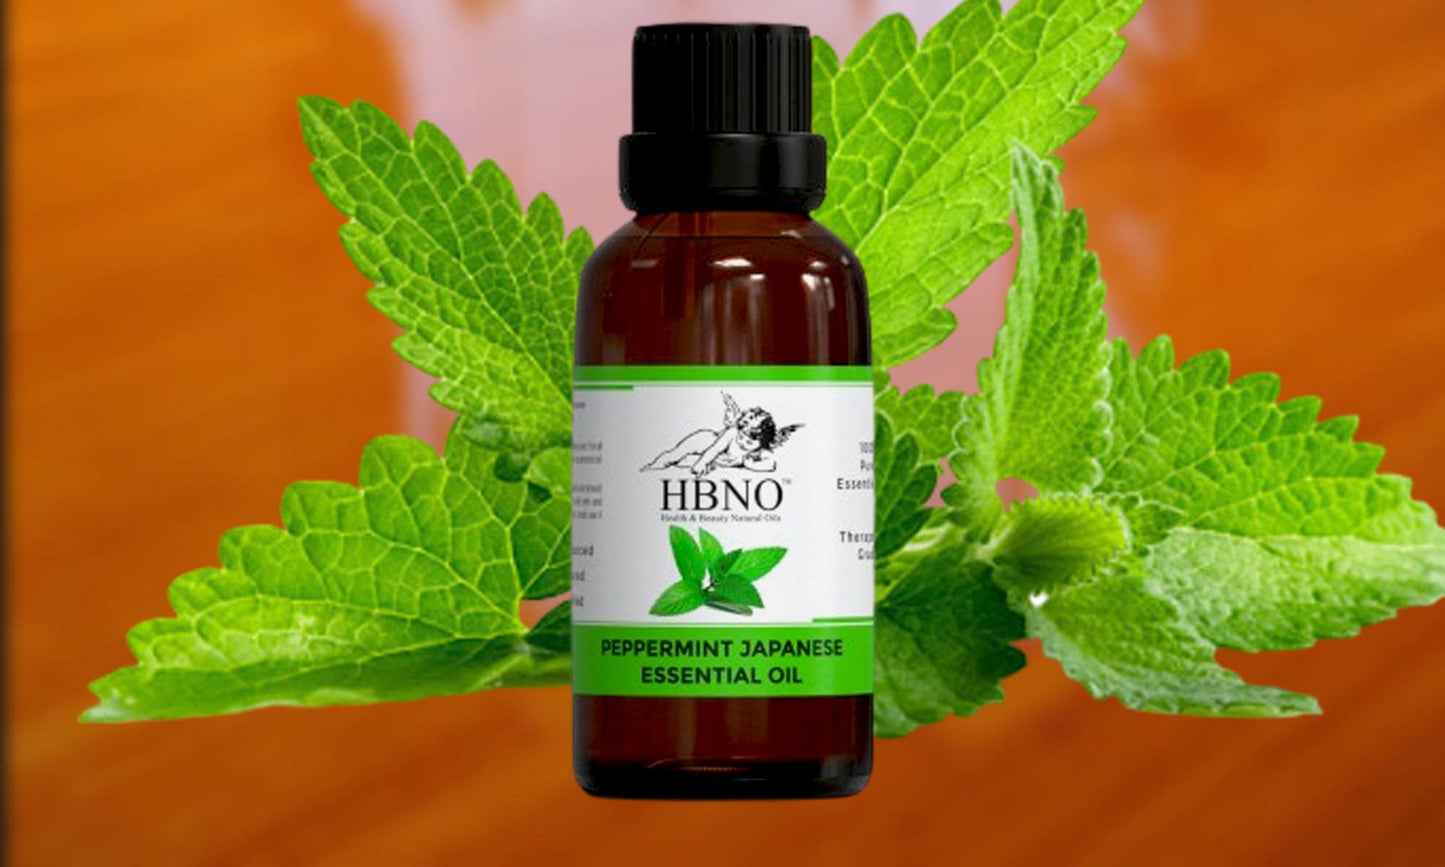 Peppermint Japanese Essential Oil for a Healthy Lifestyle